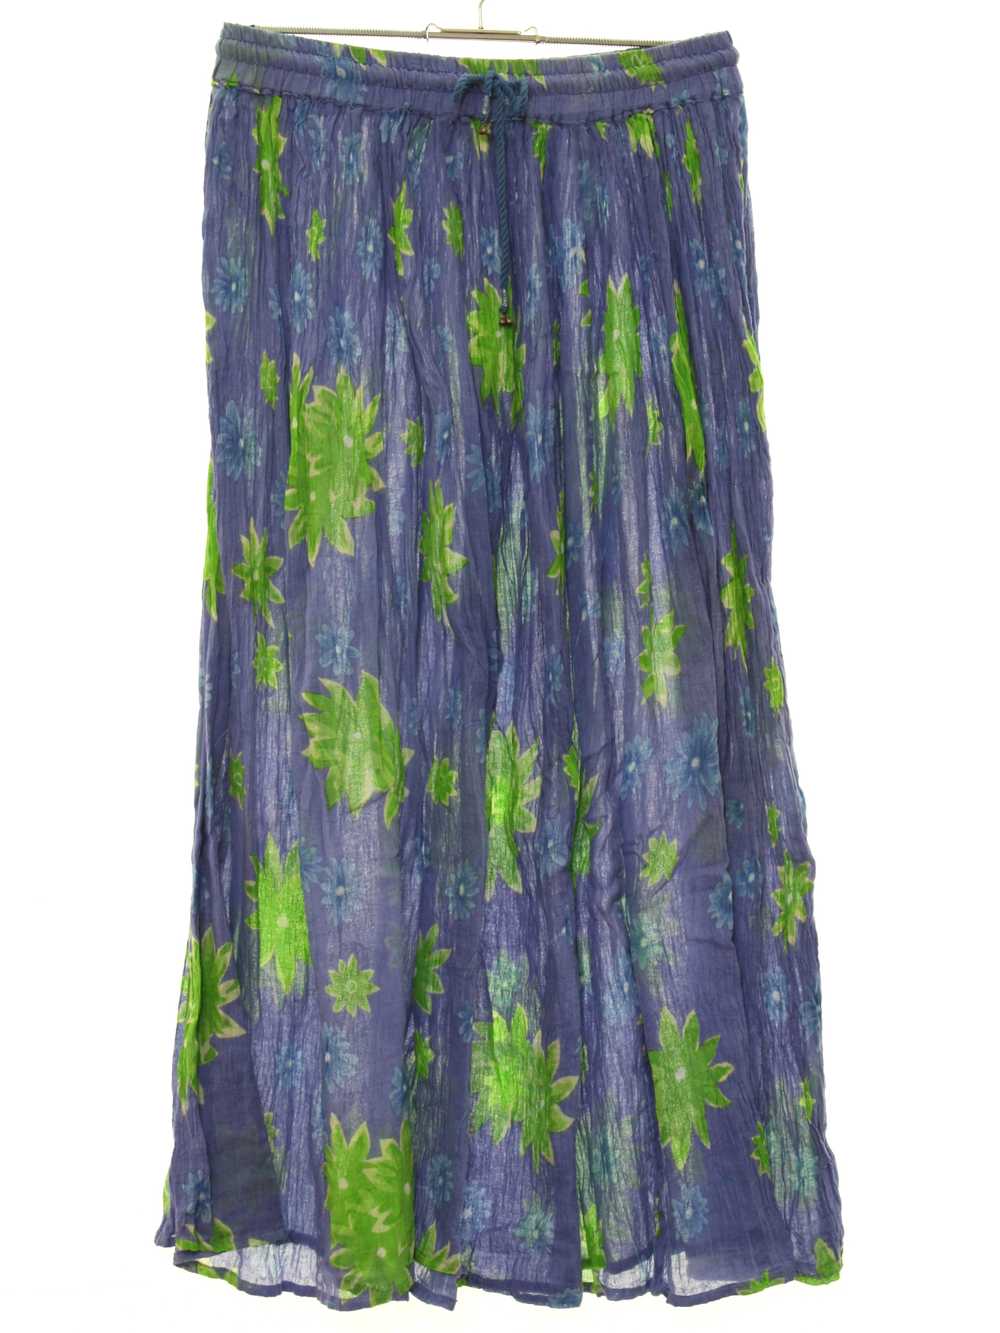 1980's Wicked 90s Broomstick Skirt - image 1